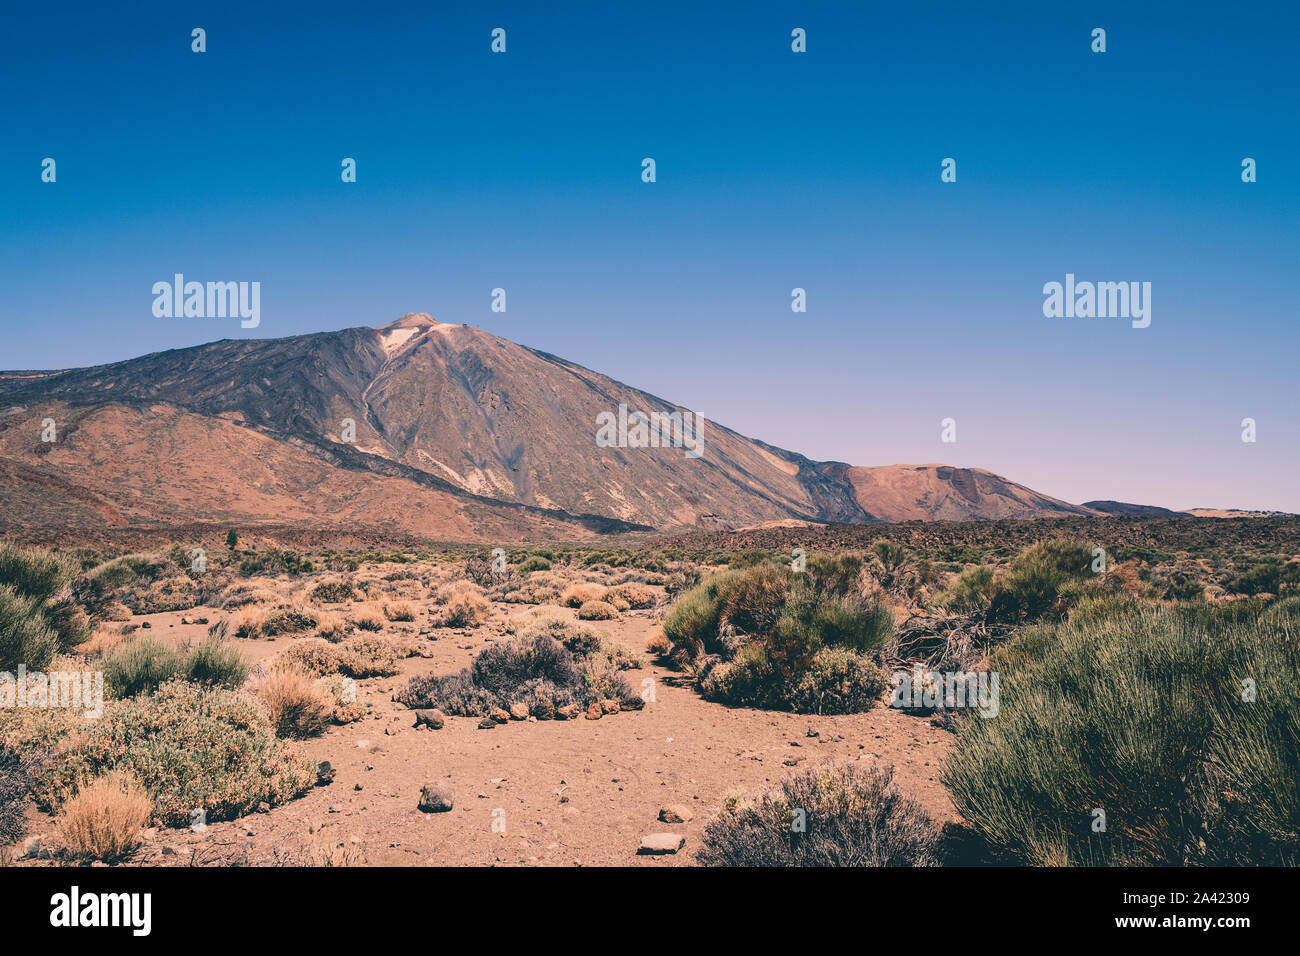 Mountain landscape and volcano Pico del Teide, National Park of Tenerife, Spain Stock Photo